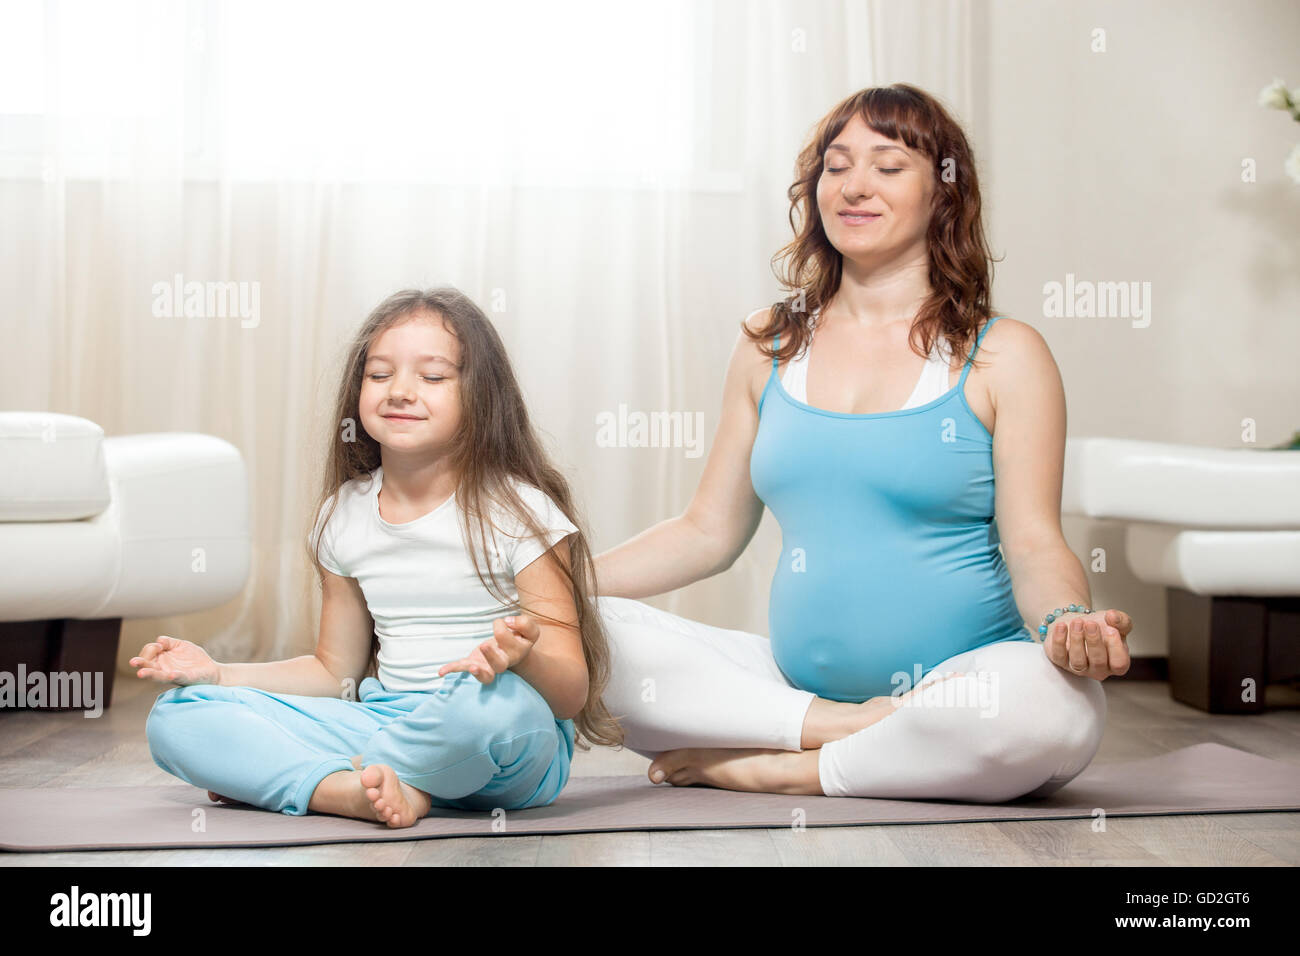 Family healthy lifestyle concept. Pregnancy Yoga and Fitness. Young happy pregnant yoga mom resting after workout with kid girl Stock Photo